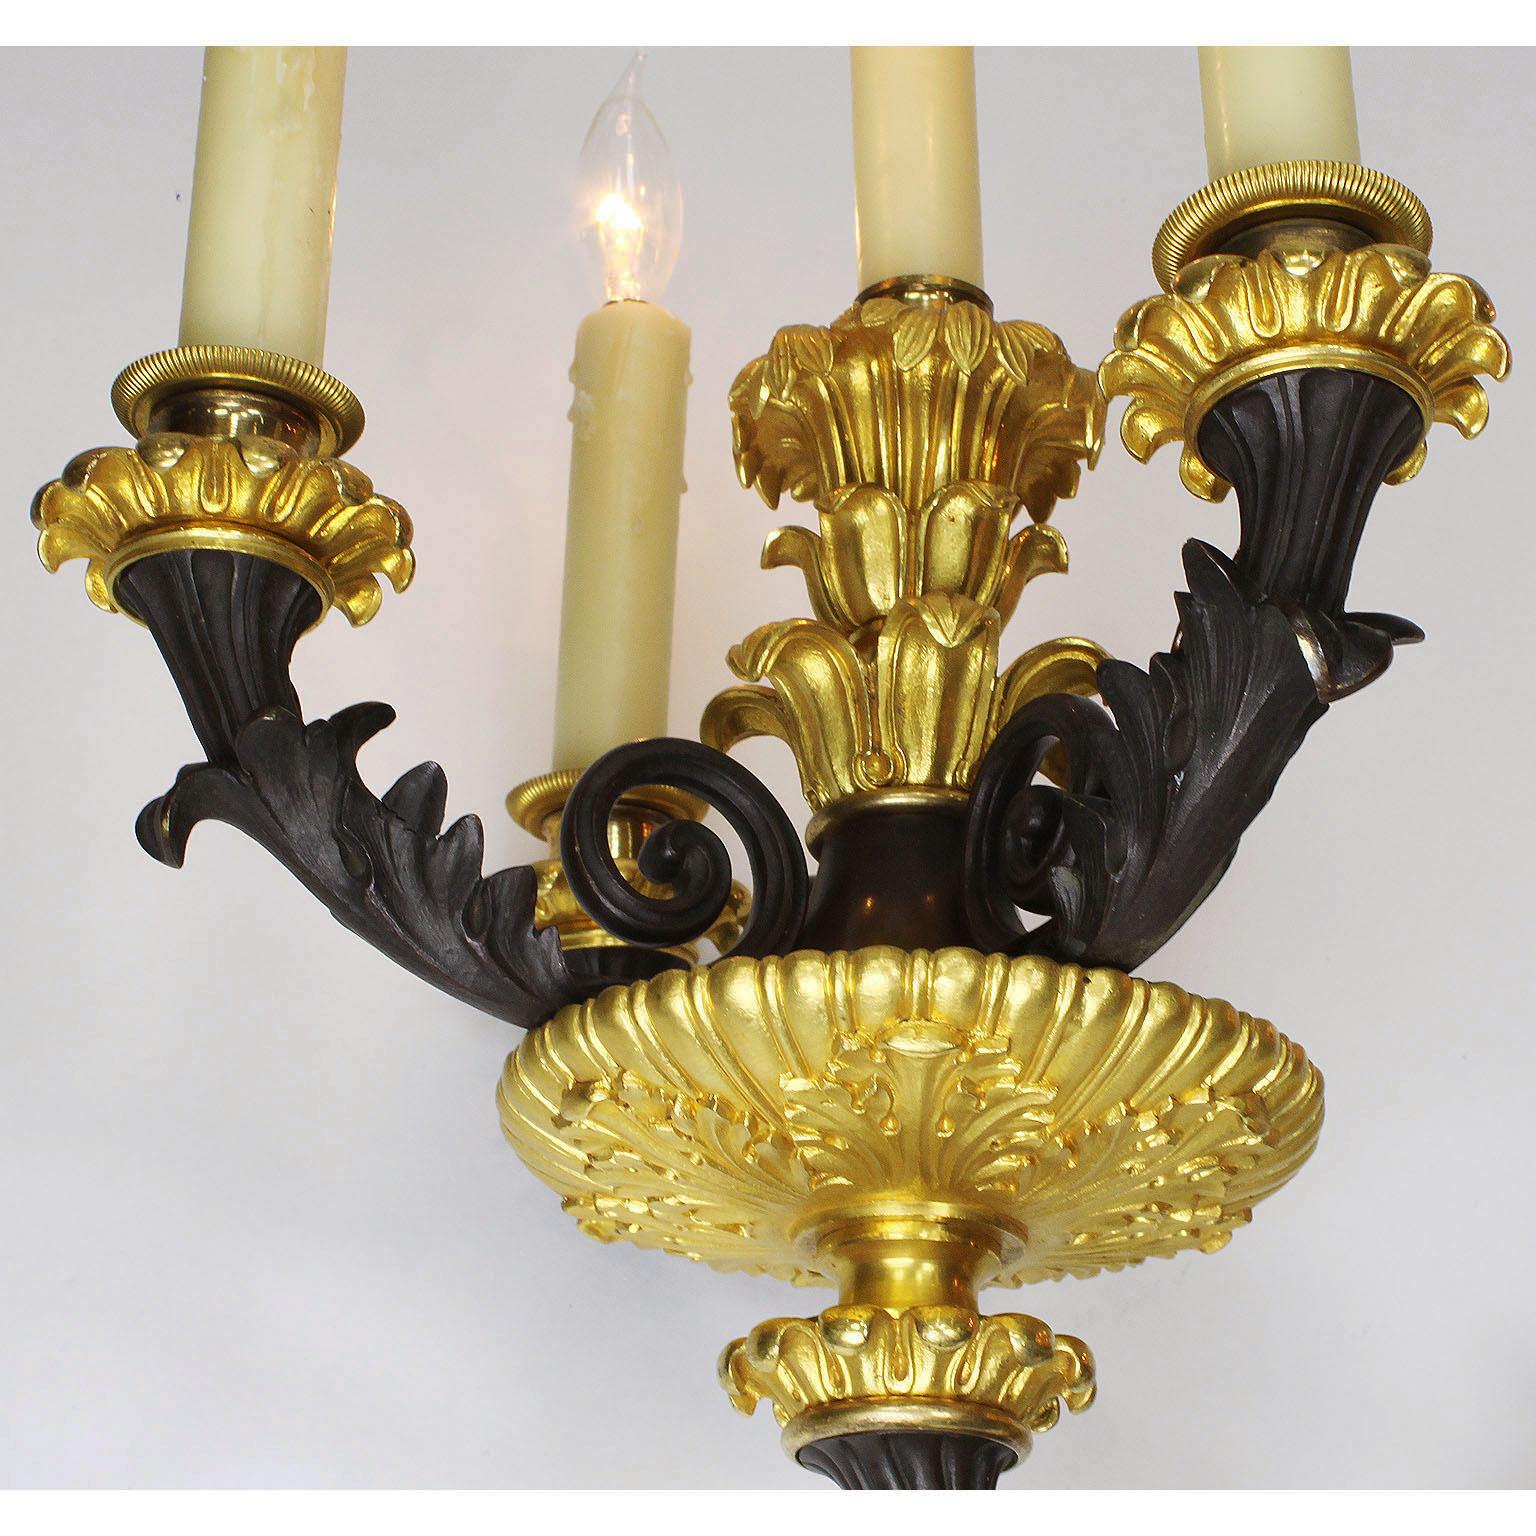 French 19th Century Neoclassical Empire Revival Style Bronze Wall Sconces, Pair For Sale 2